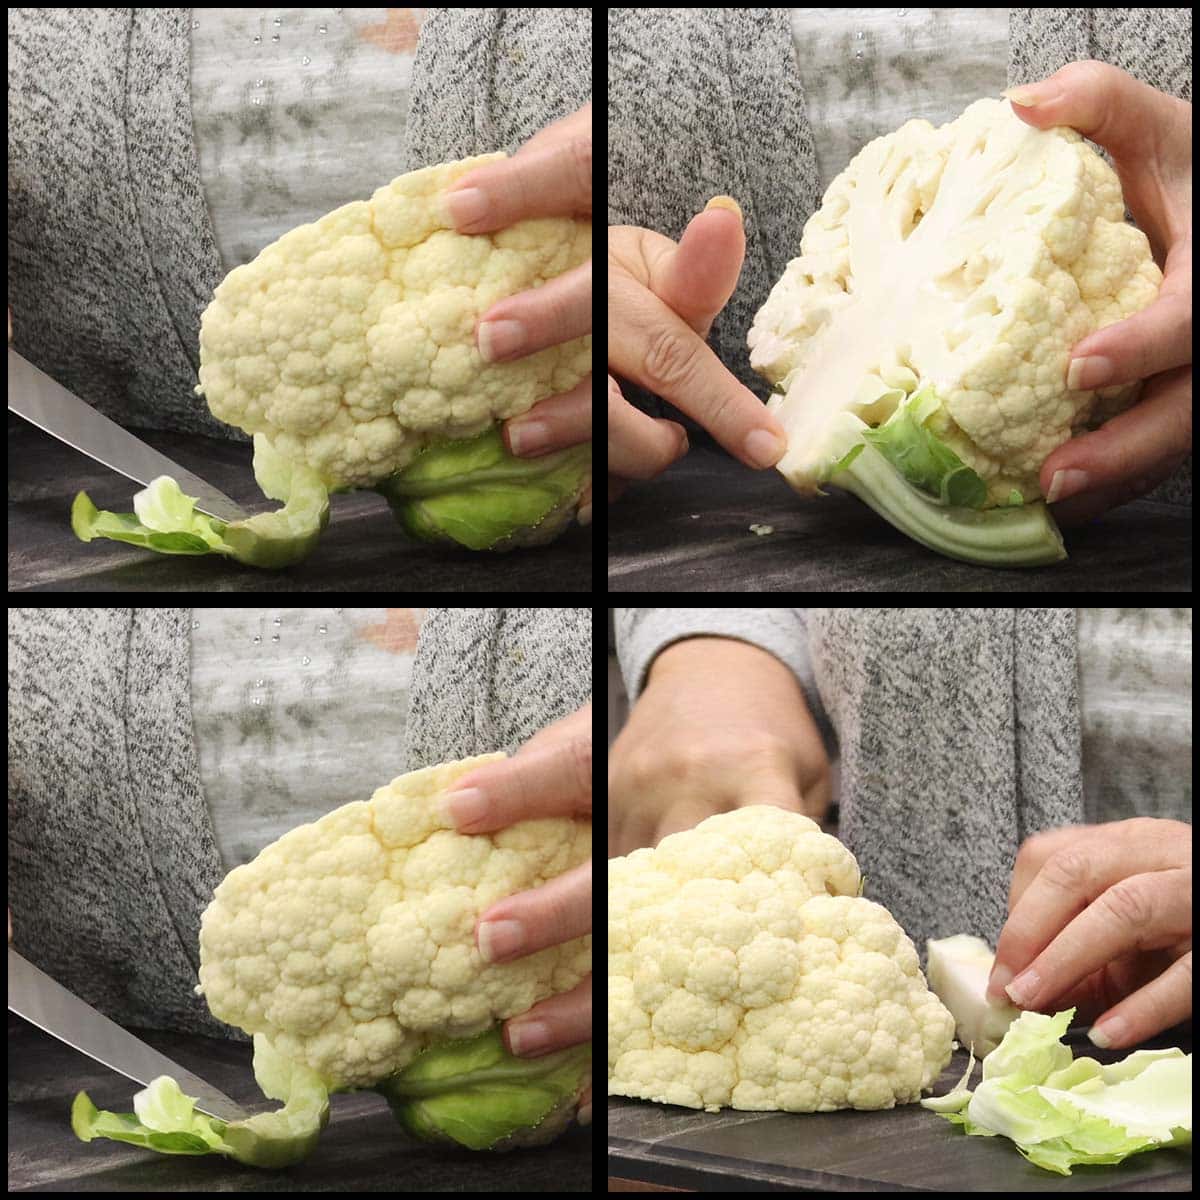 trimming cauliflower to cut into steaks.
